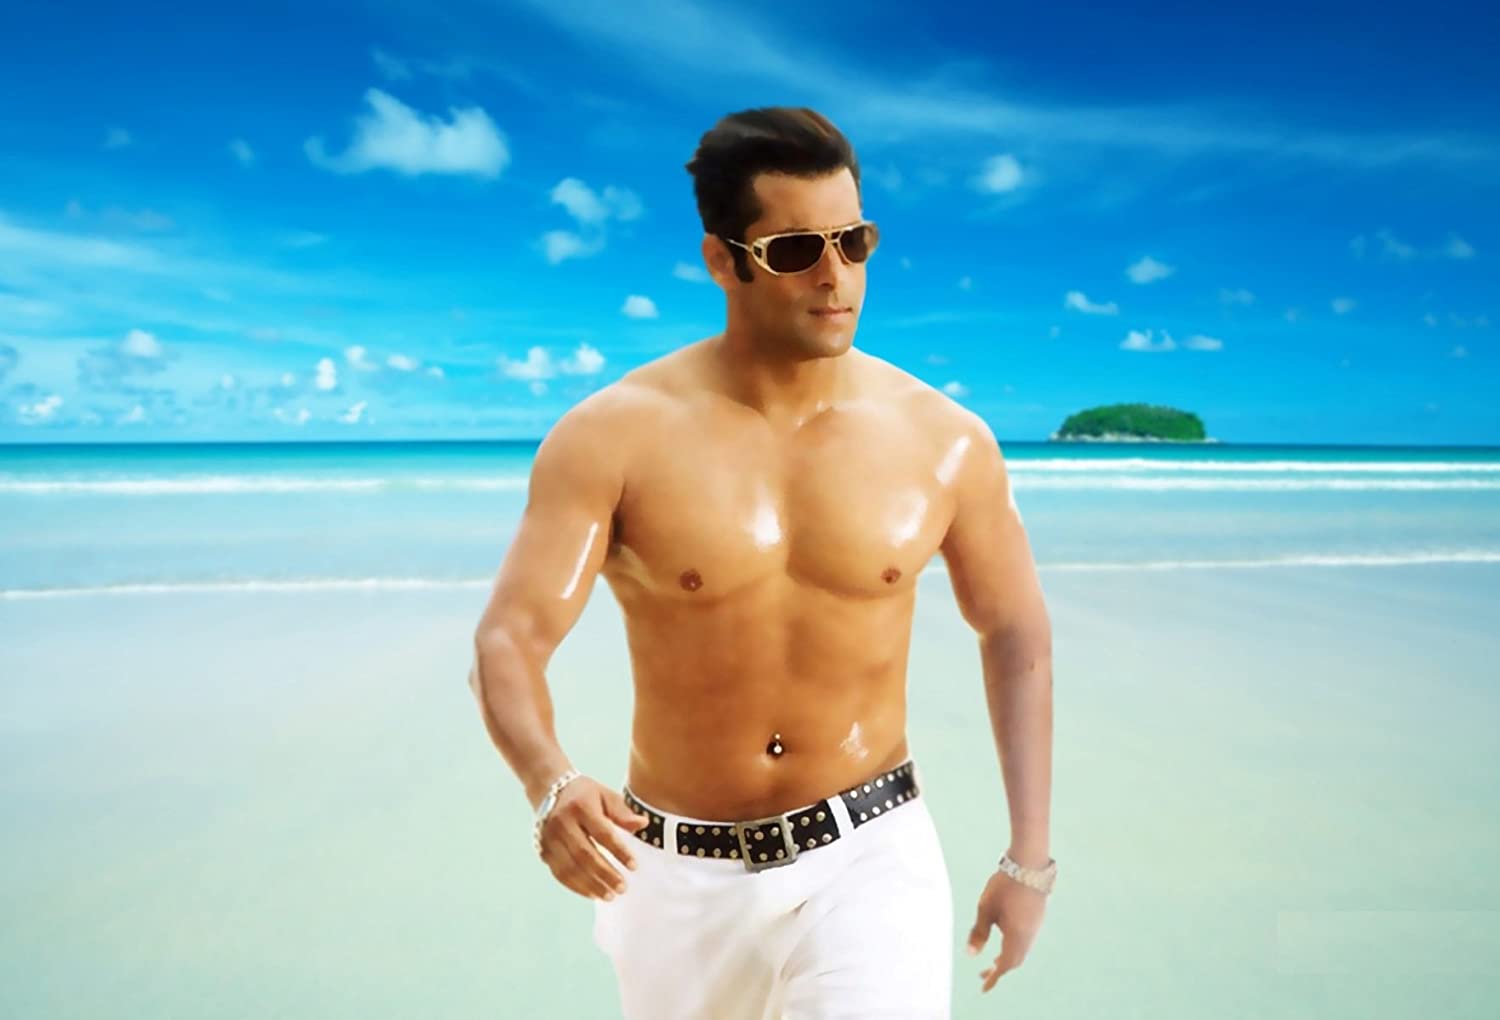 What is the DOB of Salman Khan?